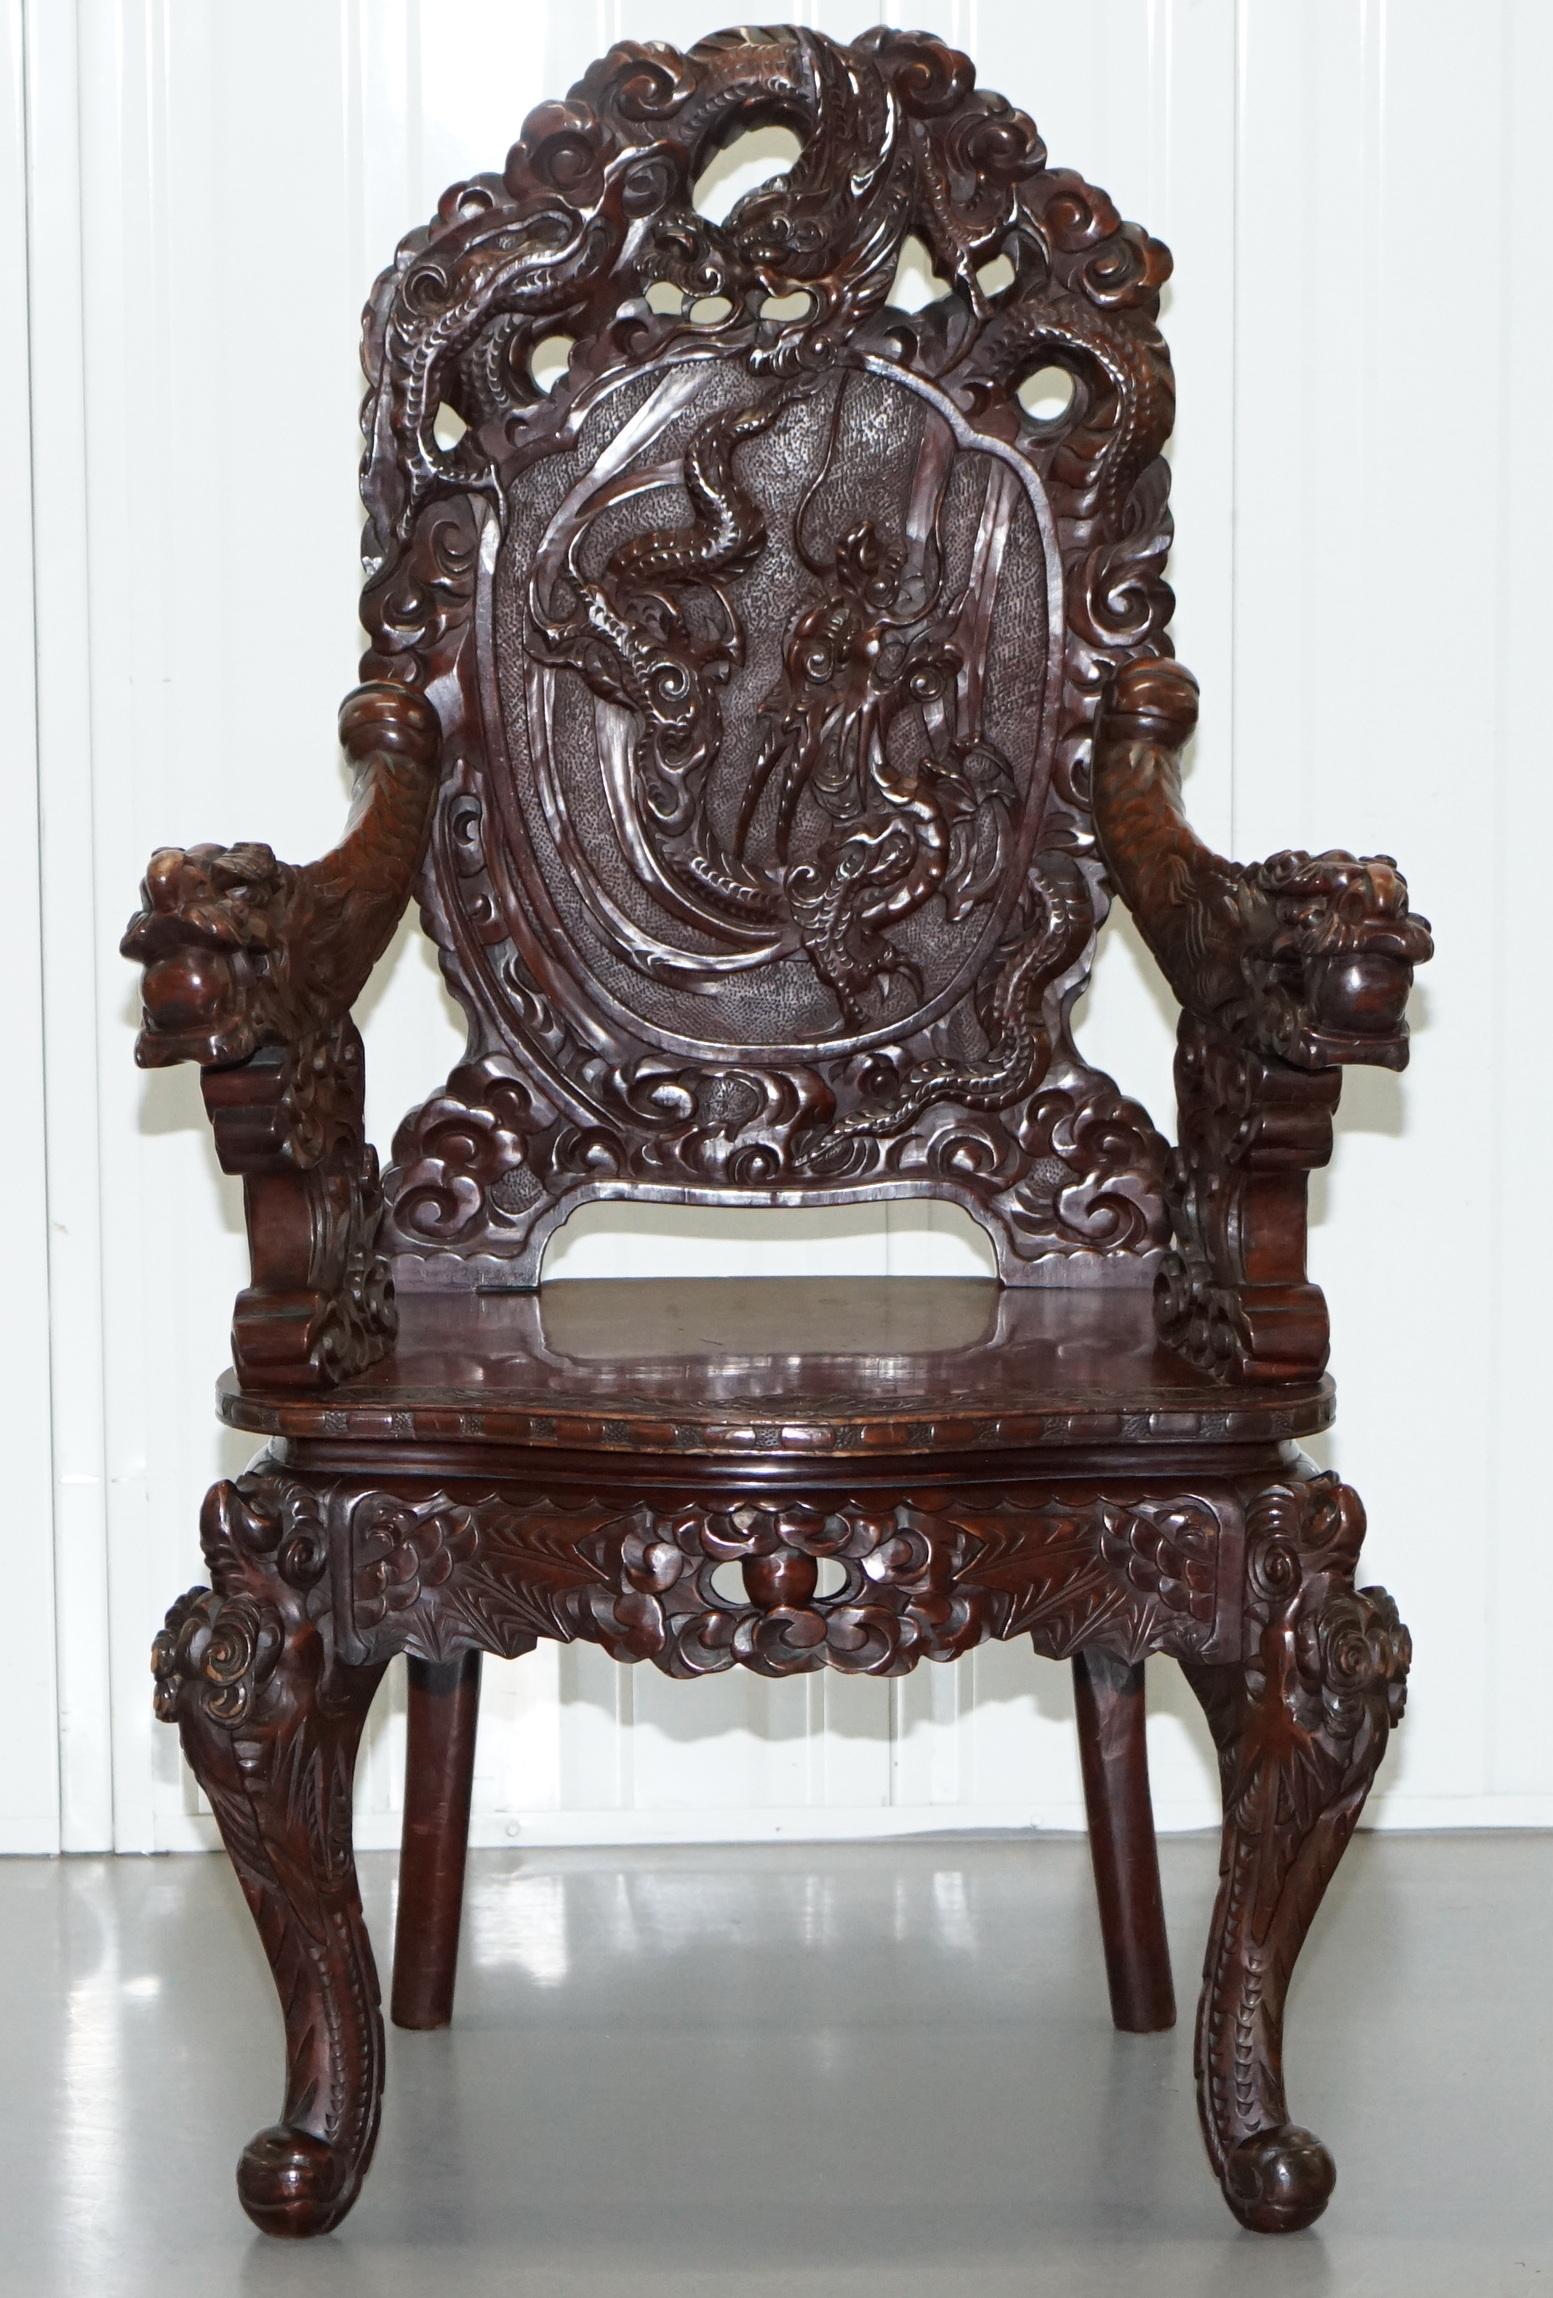 We are delighted to offer for sale this very decorative high back Japanese Export Dragon carved throne armchair, circa 1940

A good looking well made and very decorative chair, this is a high back version which is a lot rarer than the standard tub